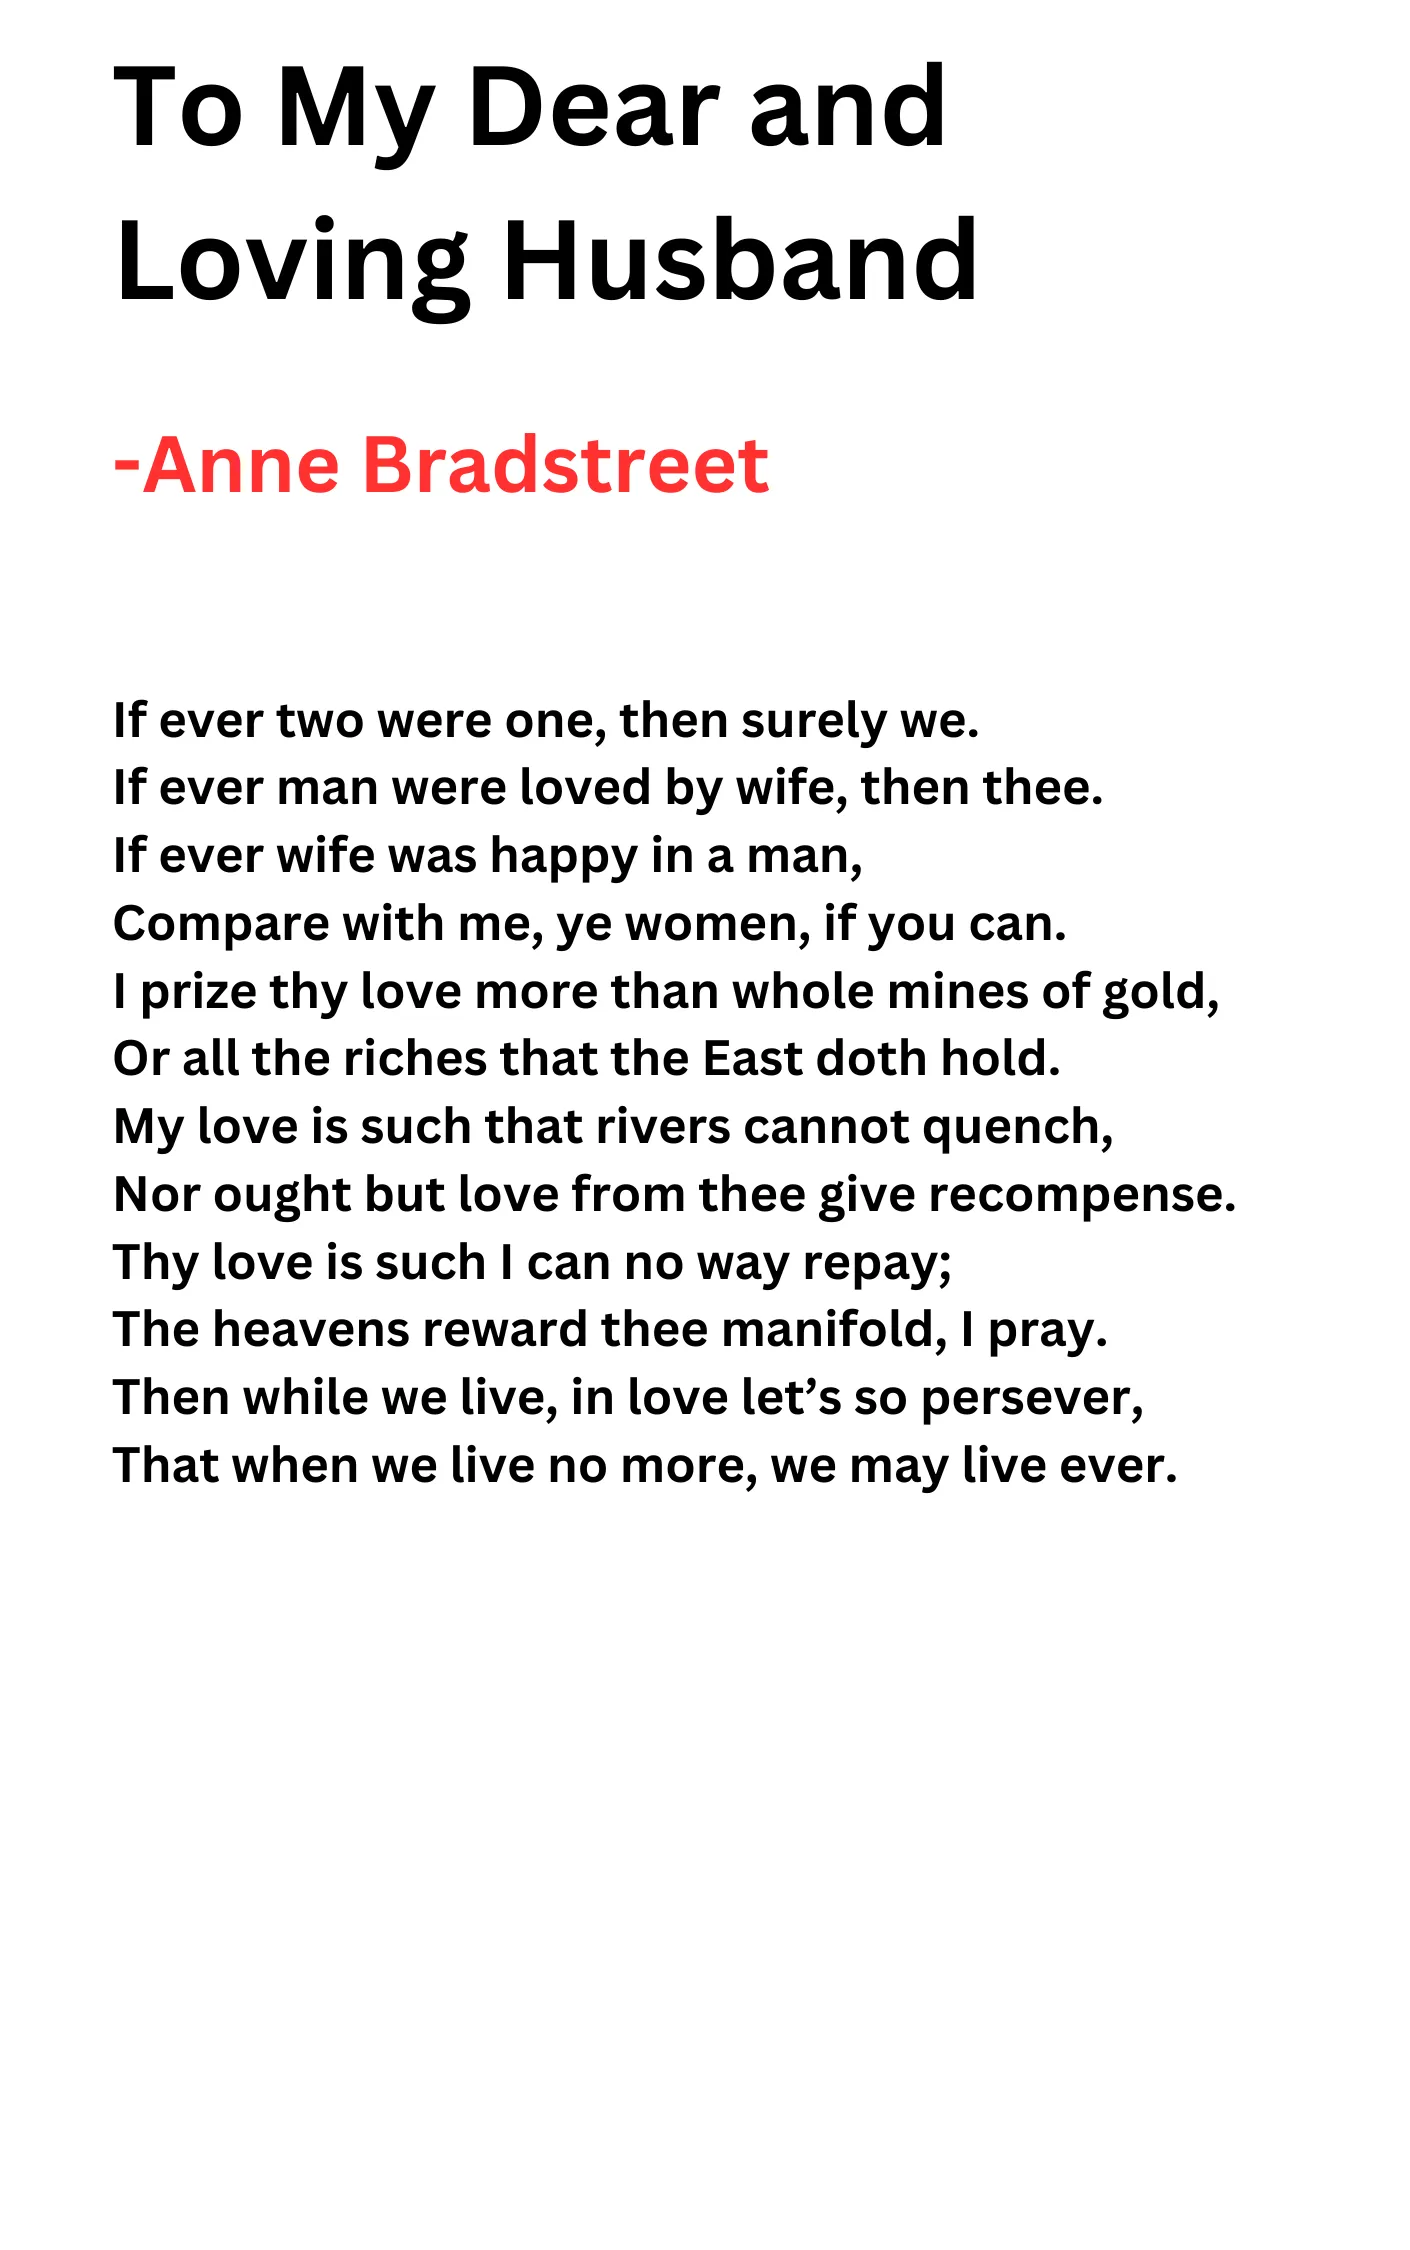 To My Dear and Loving Husband by Anne Bradstreet- Summary & Analysis